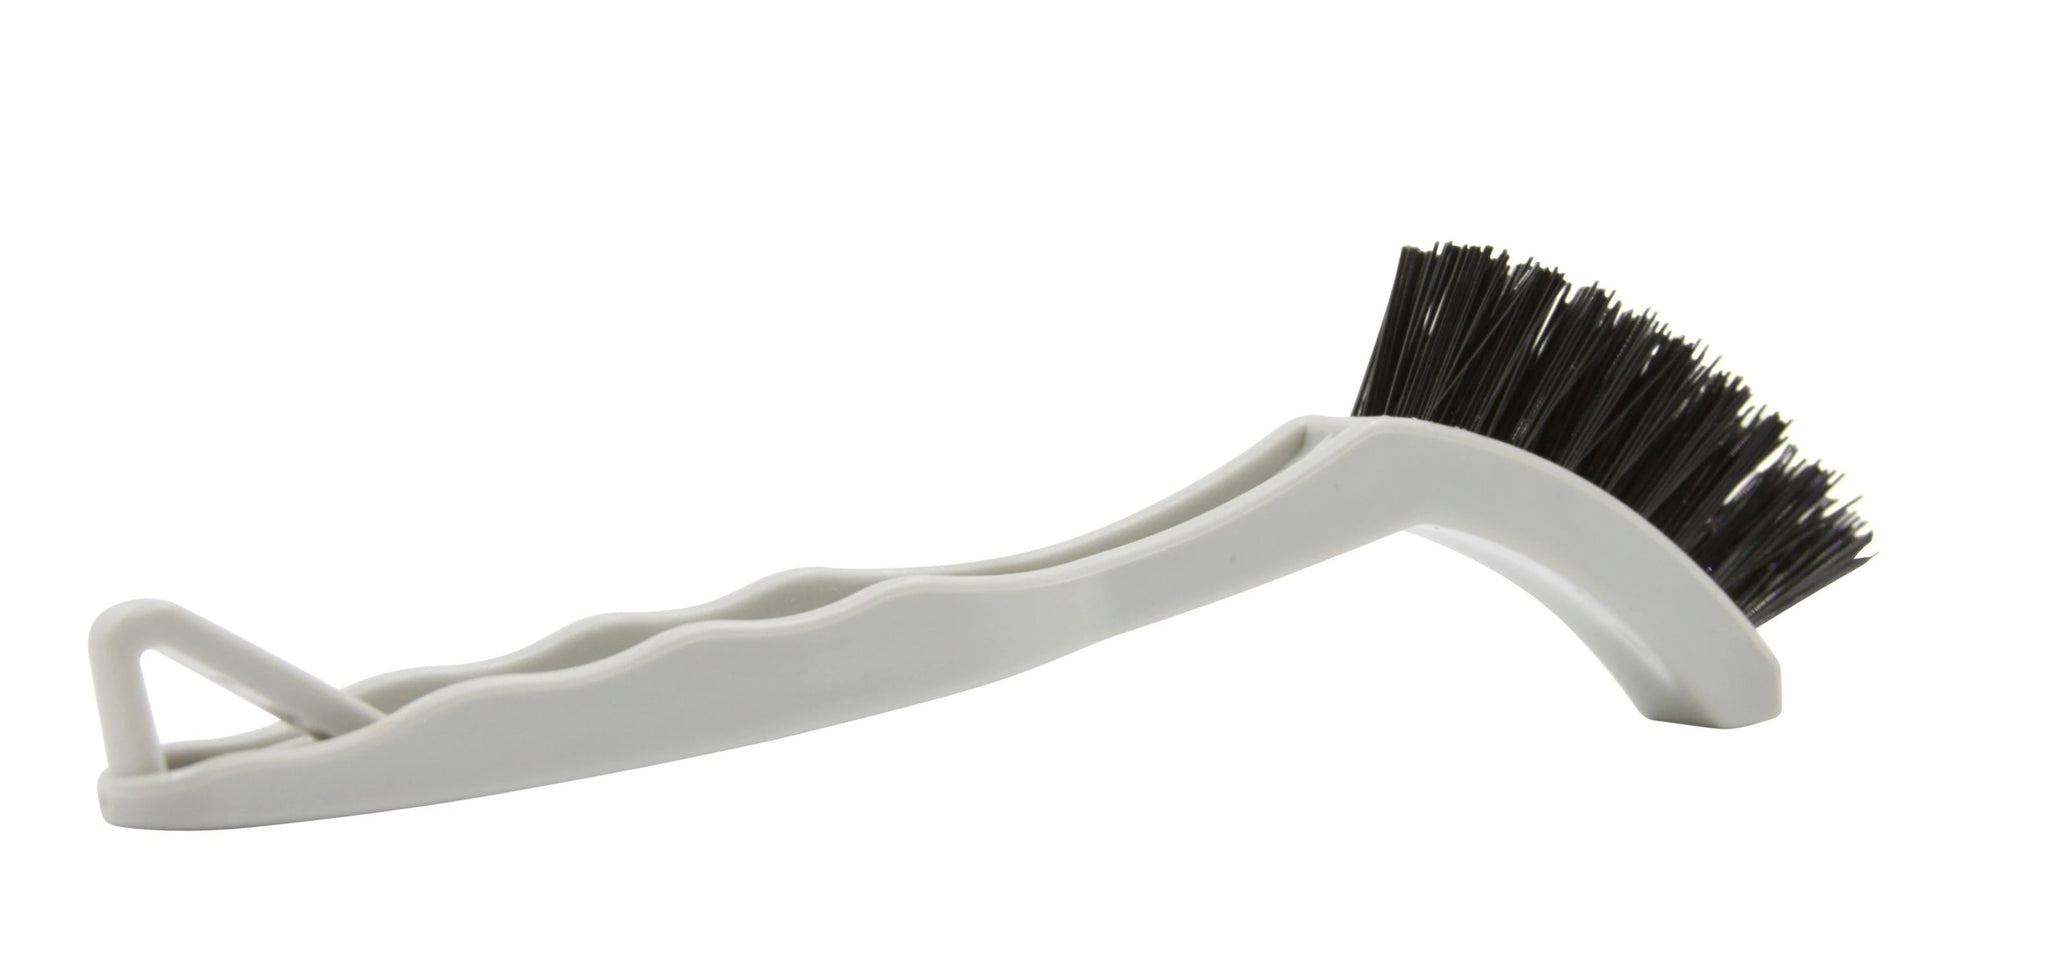 8 inch white buffing pad cleaning and conditioning brush with ¾” inch black nylon bristles.